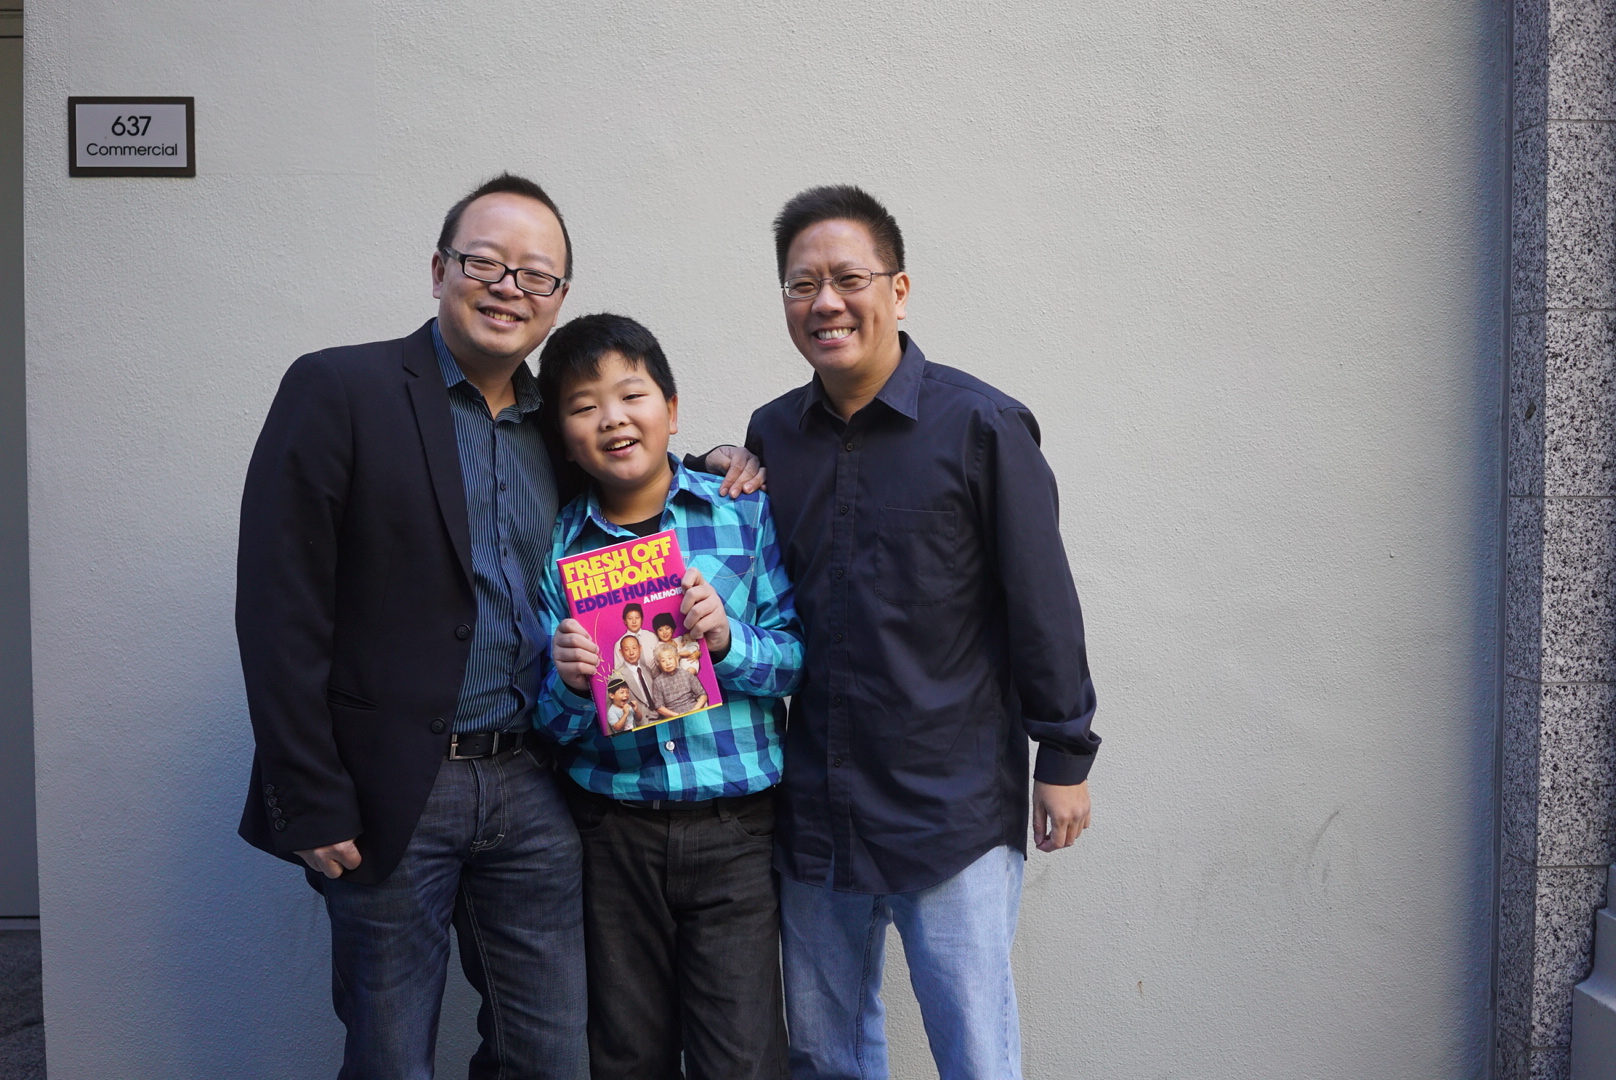 Fresh Off the Boat finale: An interview with Jeff Yang, father of Hudson  Yang, the actor who plays Eddie Huang.